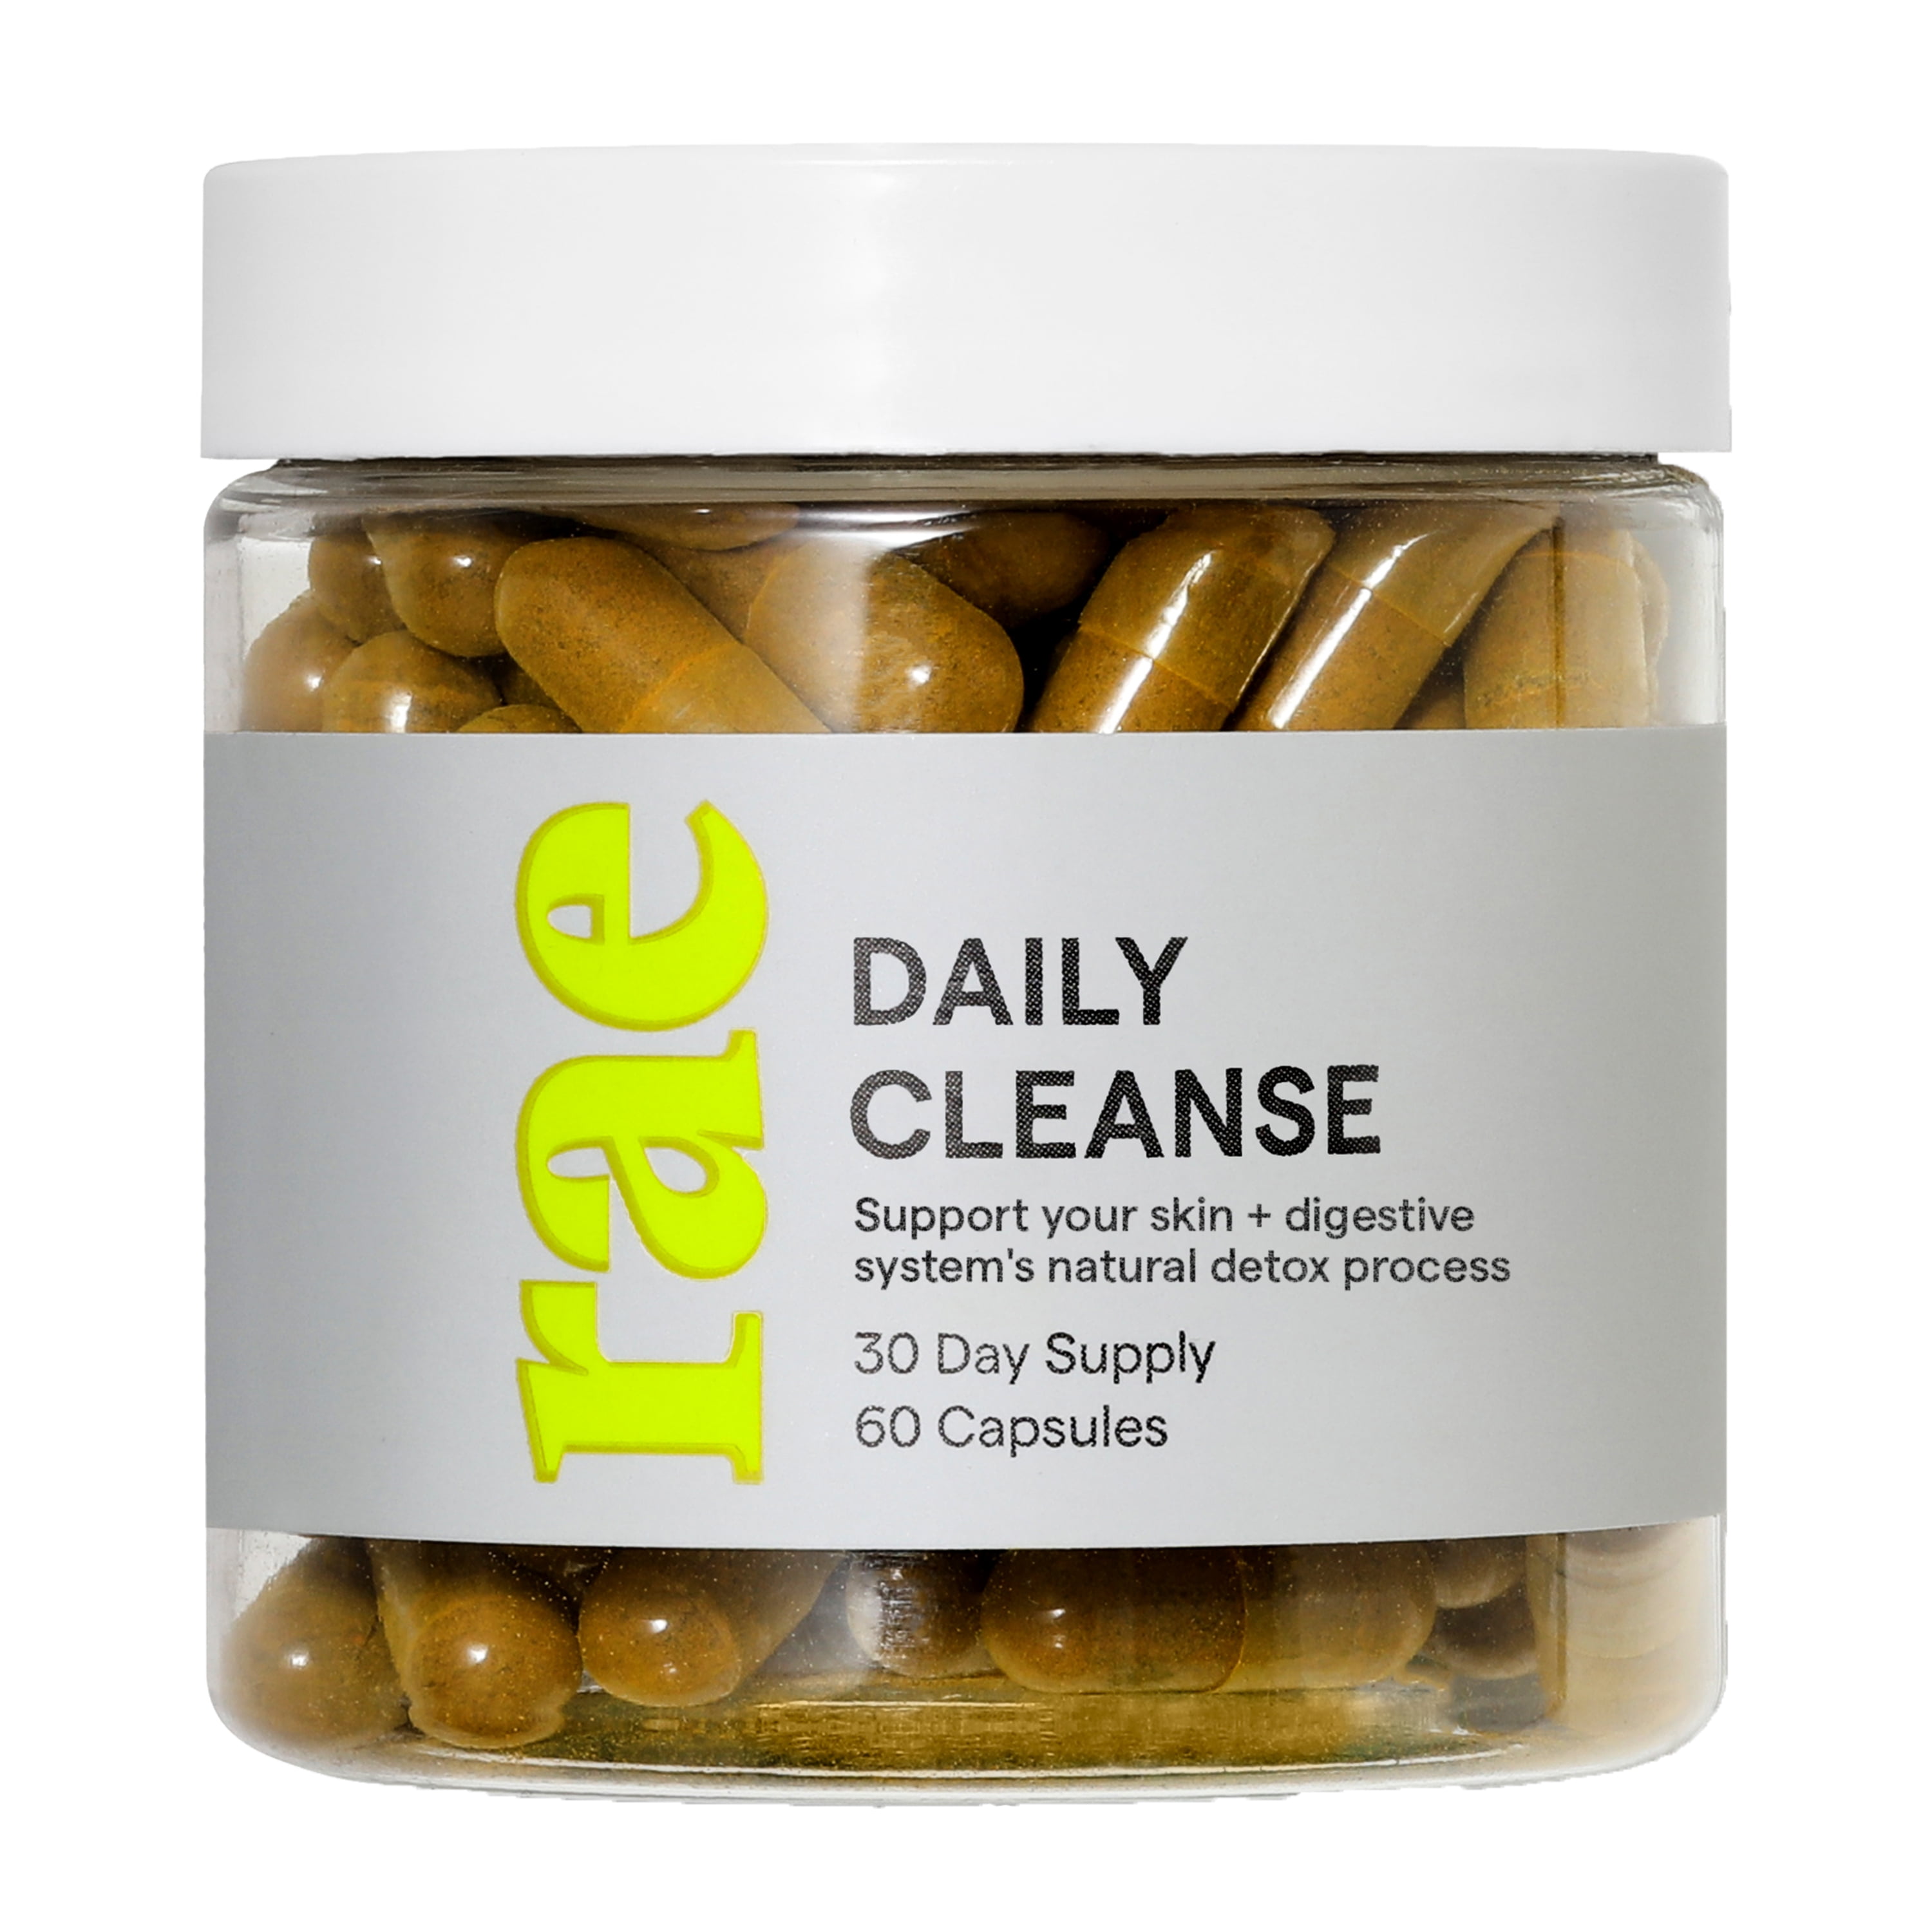 Rae Daily Cleanse Supplement with Herbs, Turmeric & Aloe, Support Skin & Digestive System, 60ct